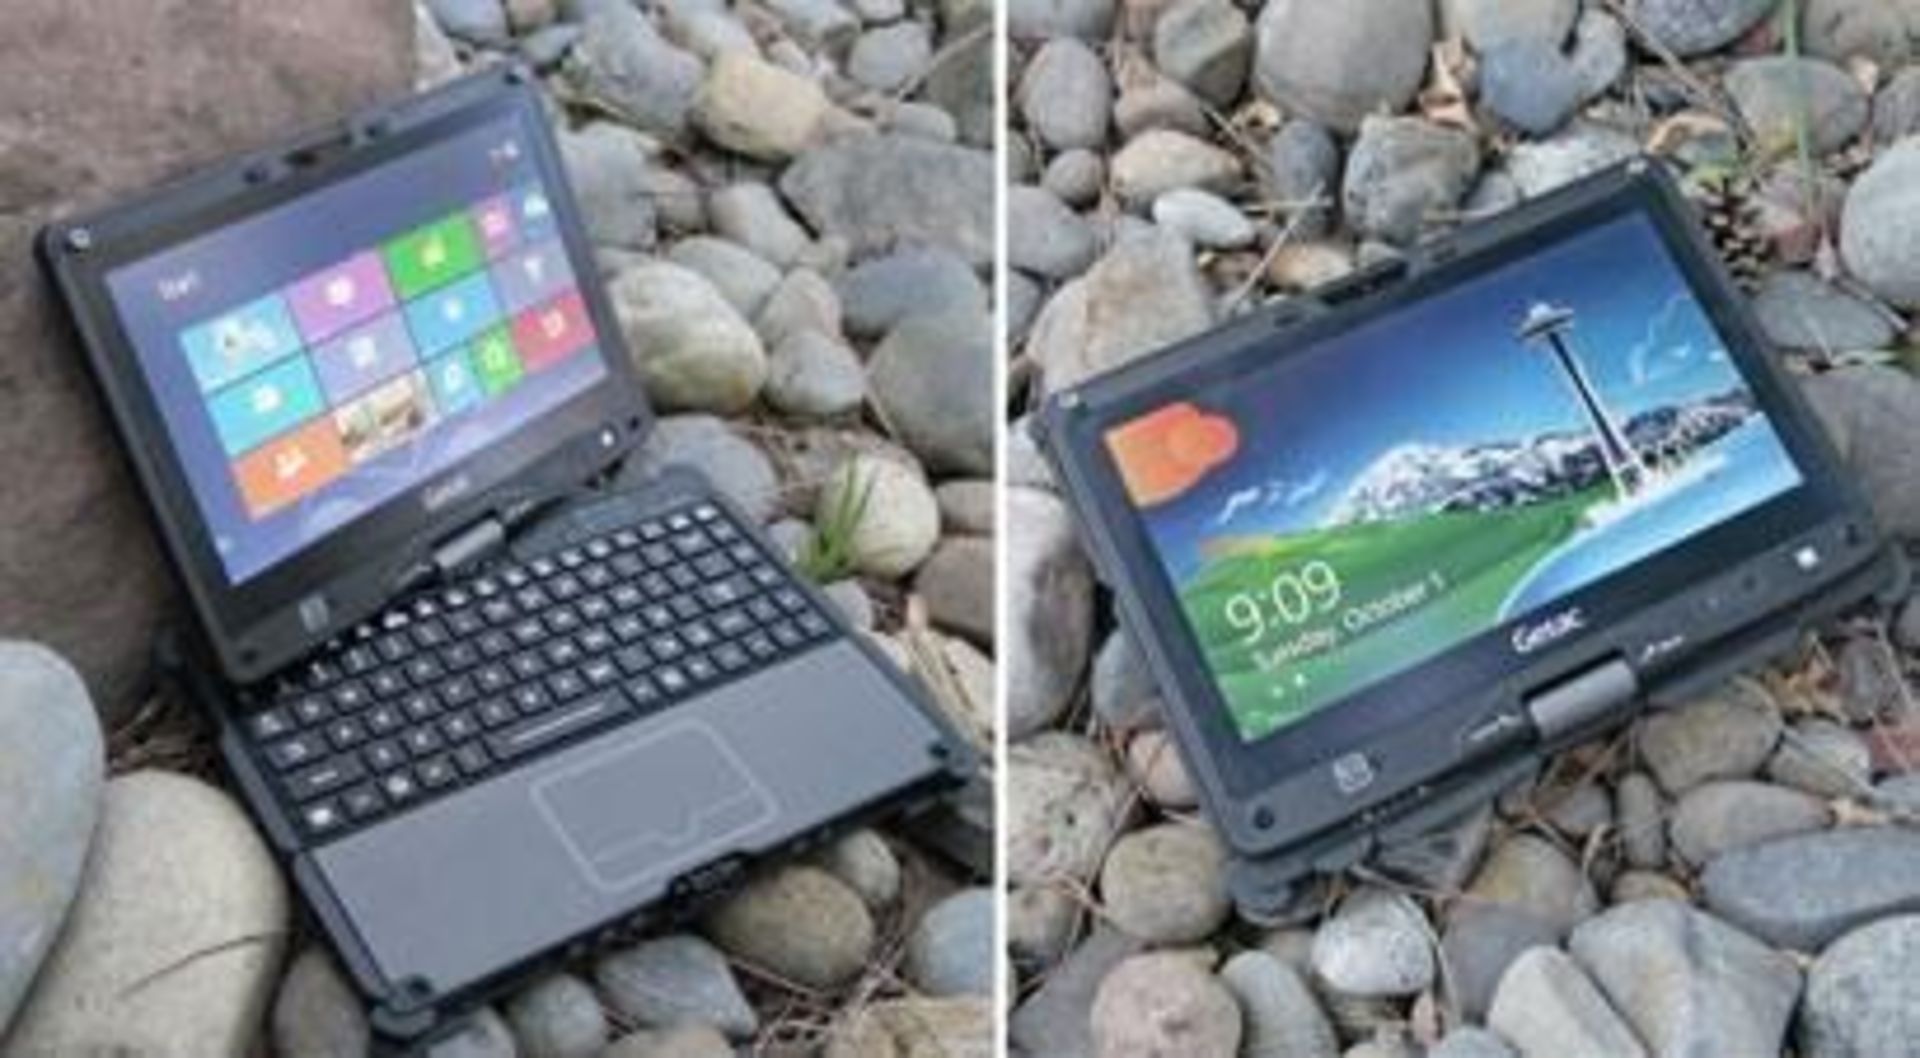 1 x Getac V200 Rugged Laptop Computer - Rugged Laptop That Transforms into a Tablet PC - Features an - Image 3 of 8